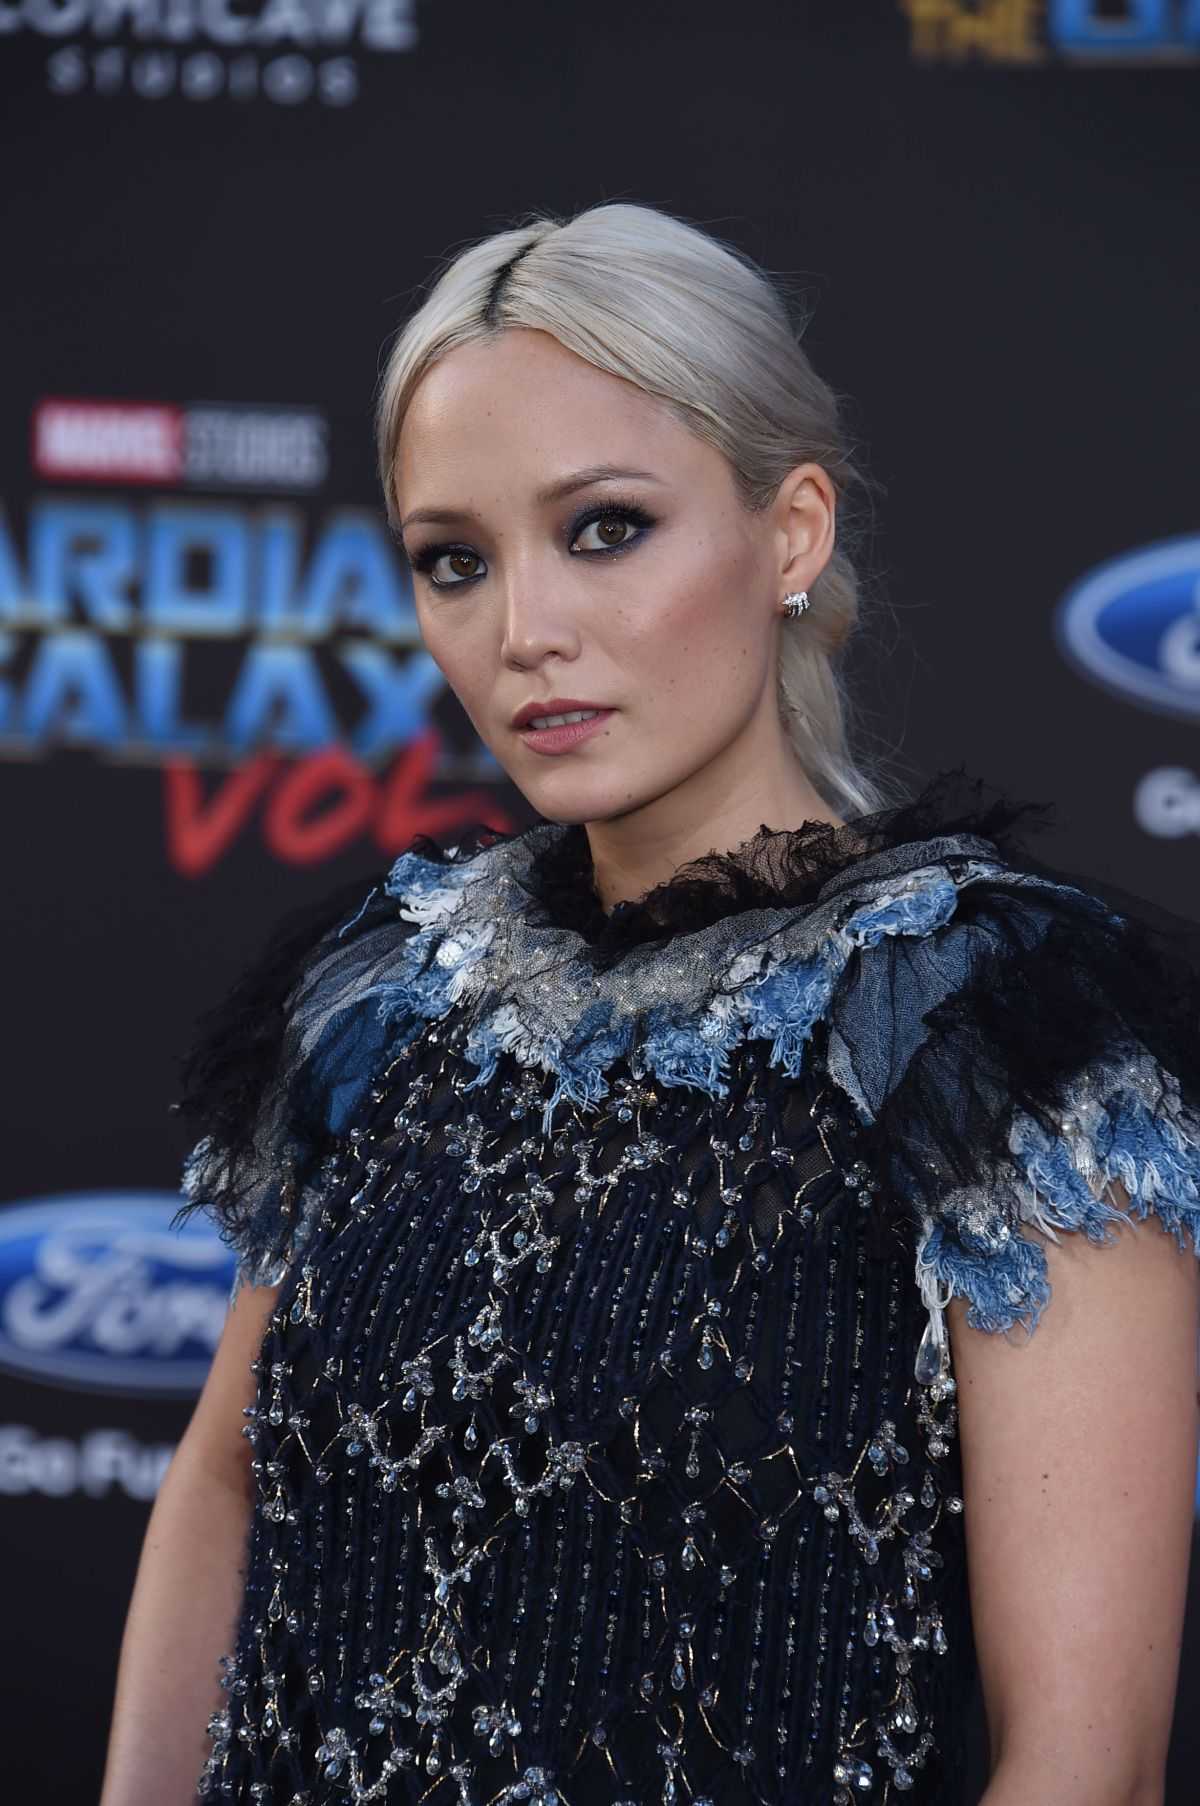 70+ Hot Pictures Of Pom Klementieff Who Plays Mantis In Marvel Cinematic Universe 19